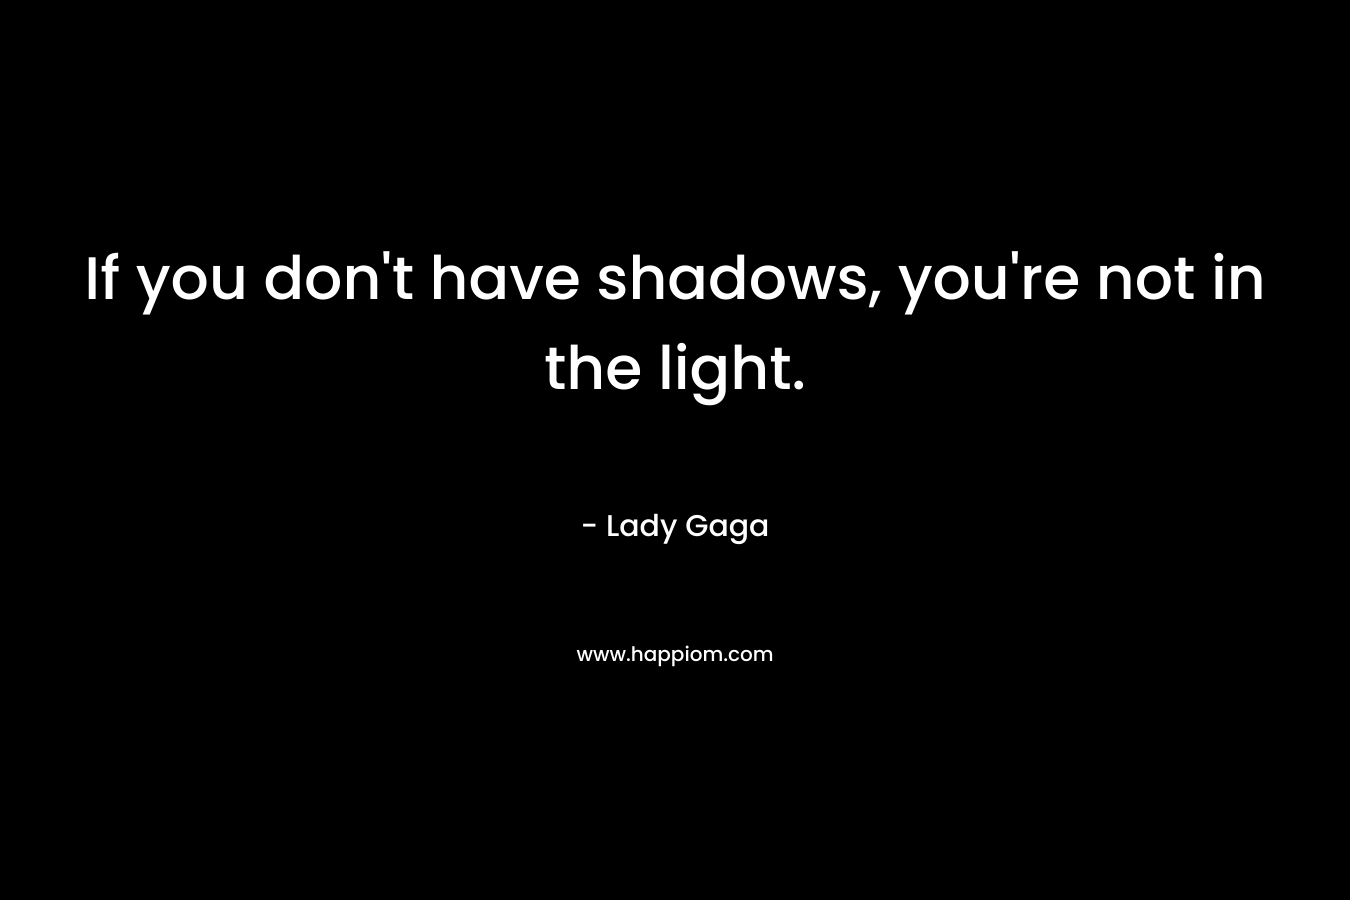 If you don’t have shadows, you’re not in the light. – Lady Gaga